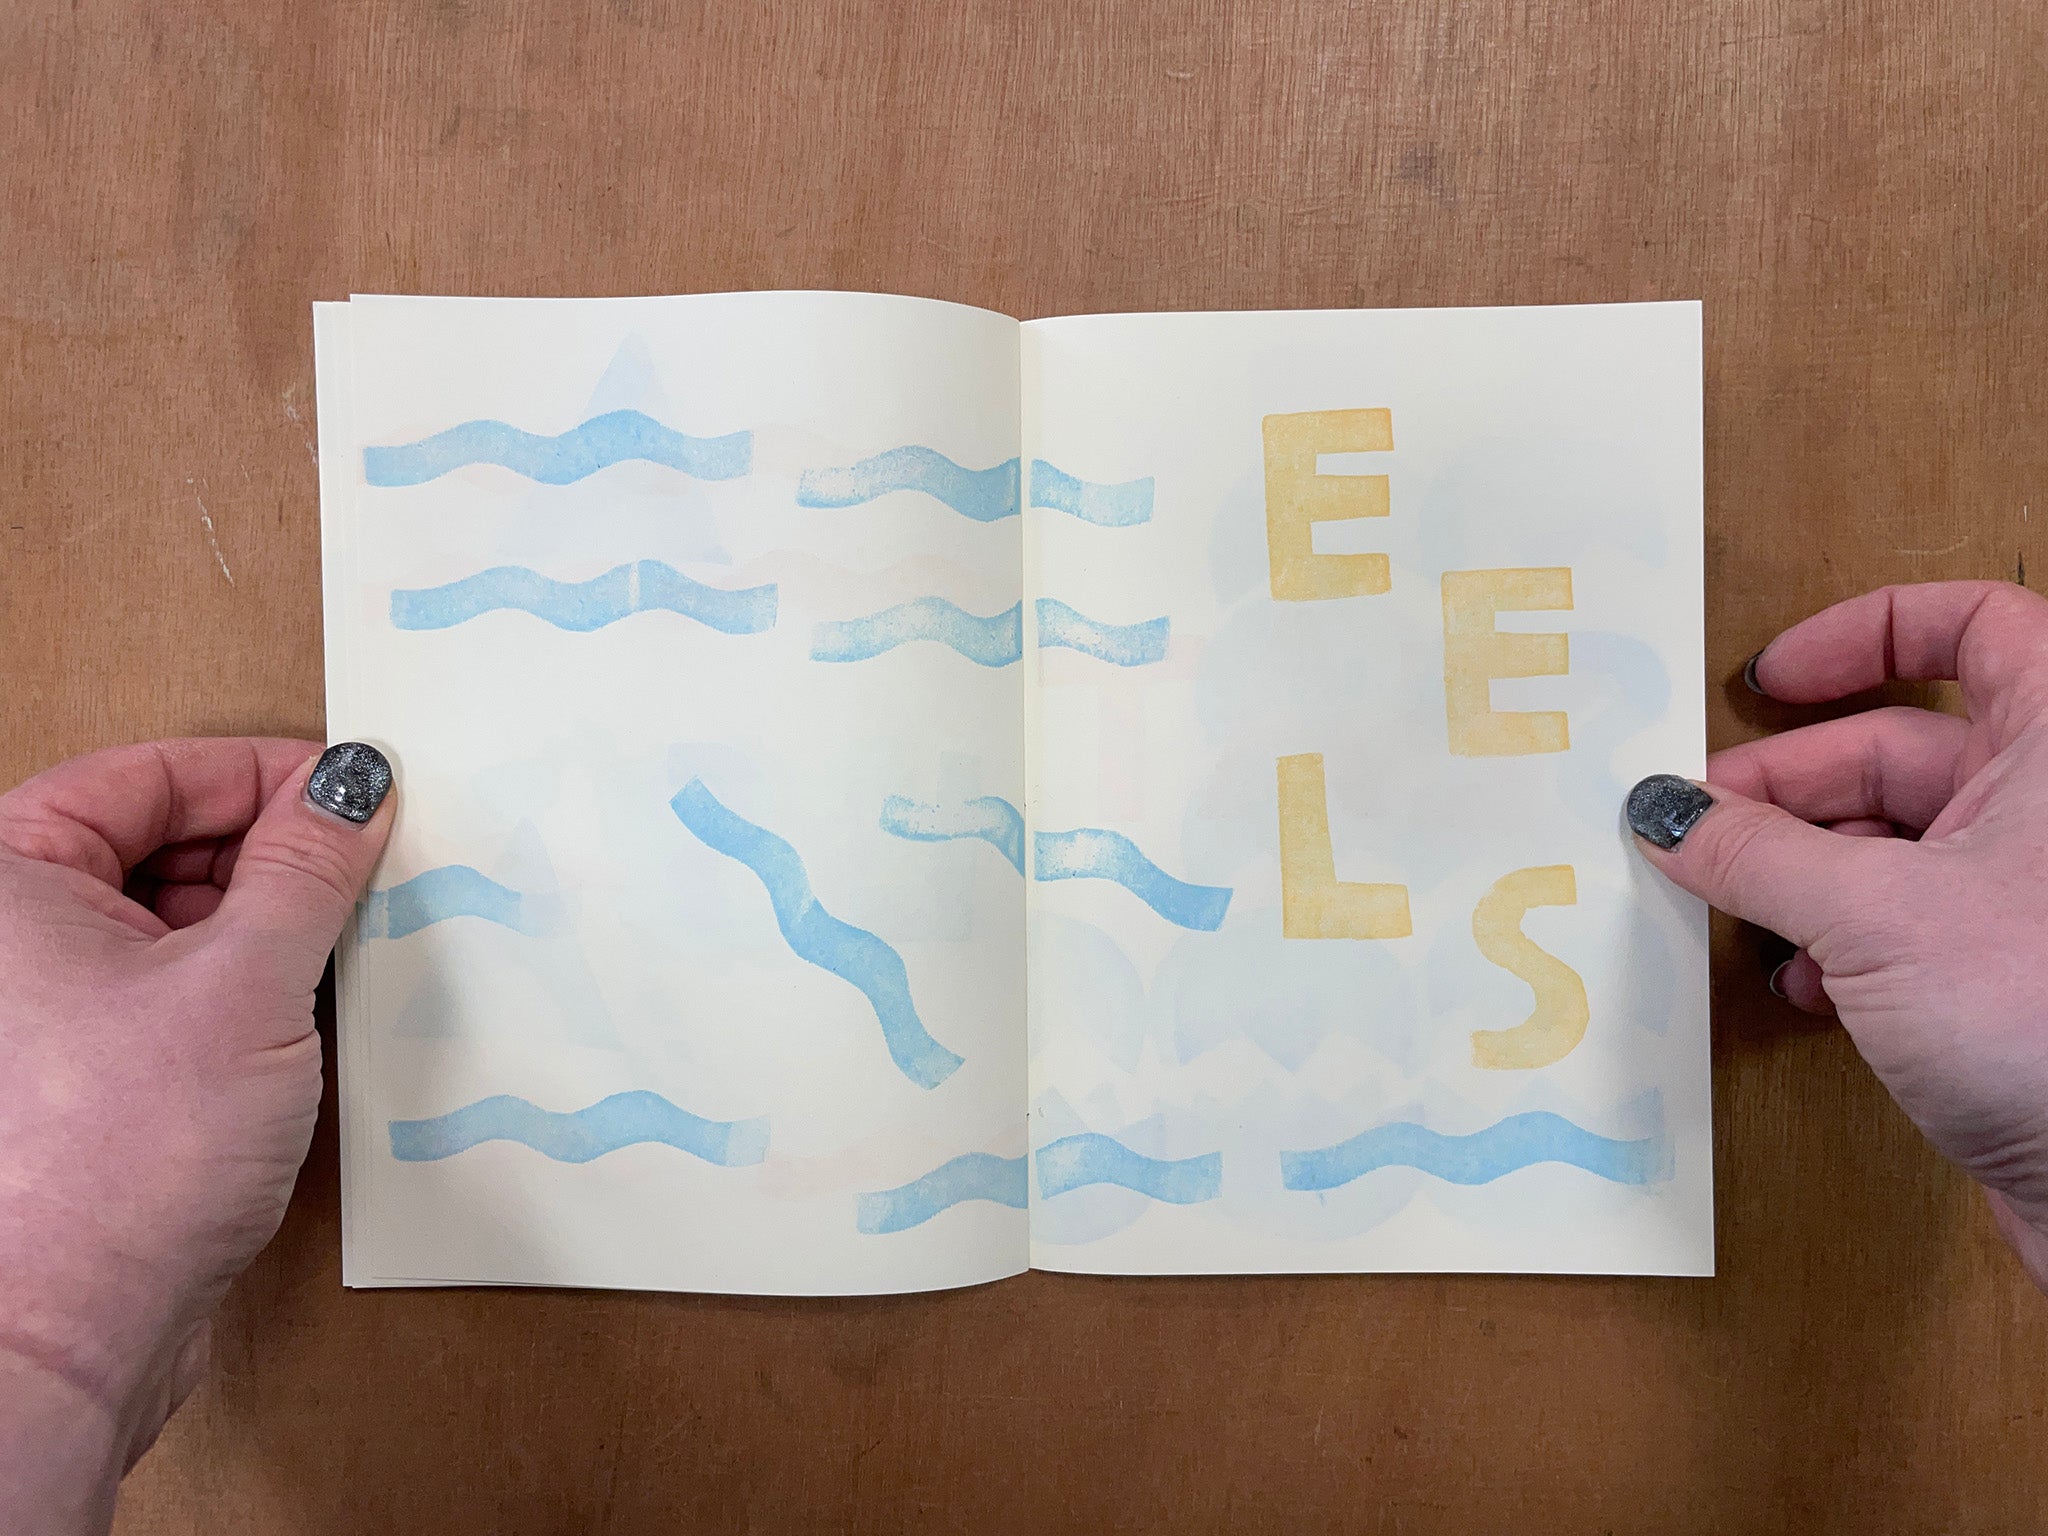 WORDS AND SHAPES by Eleonora Marton